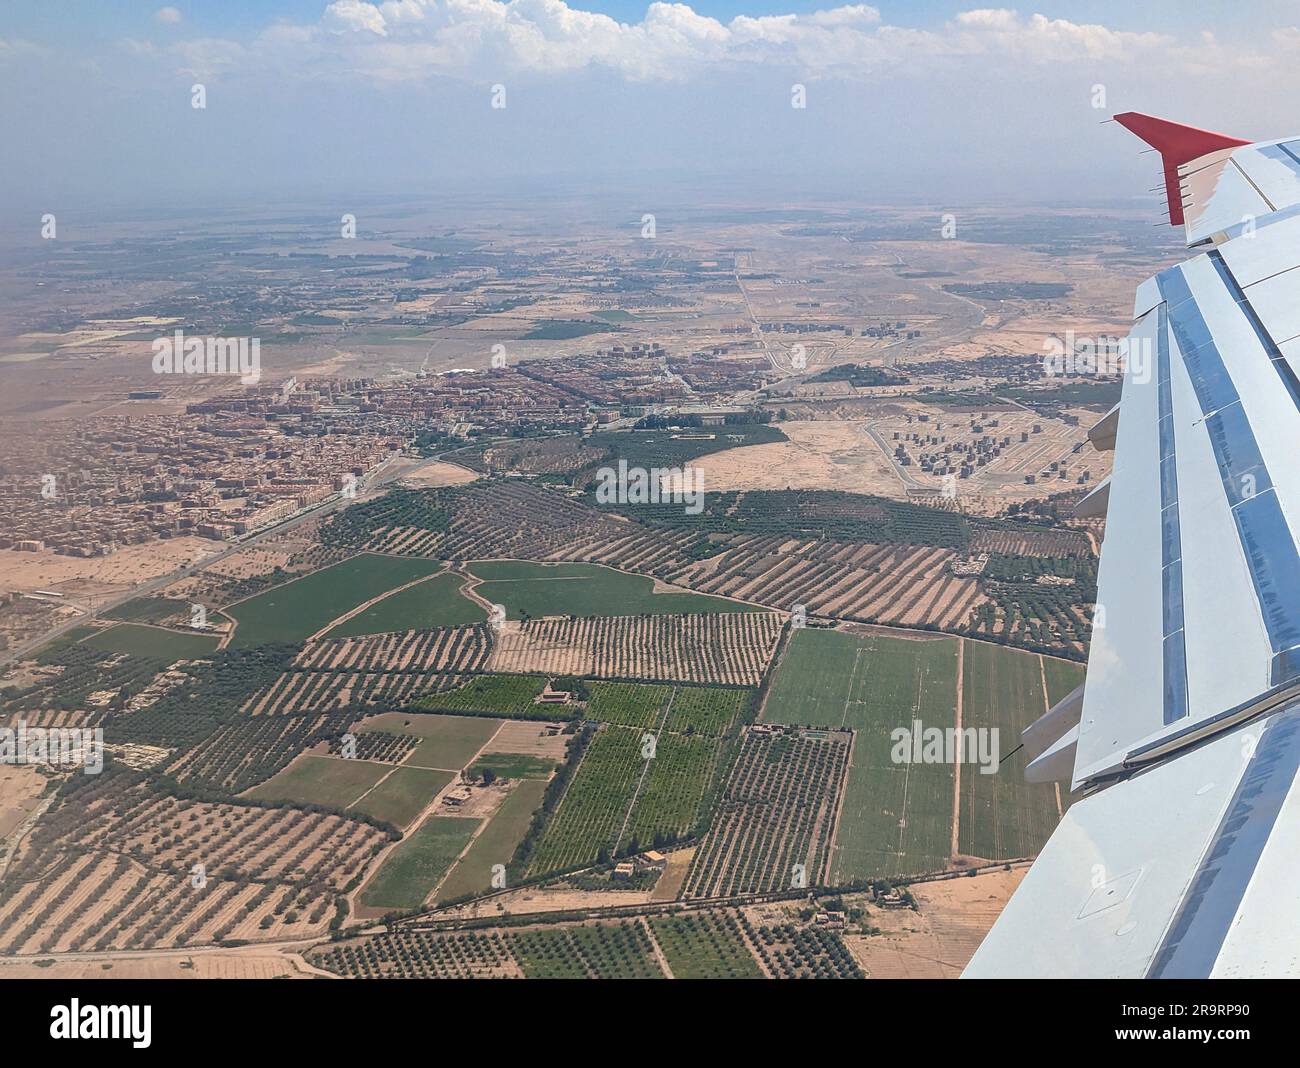 Aerial view of the Moroccan landscape and Marrakesh seen from an airplane Stock Photo